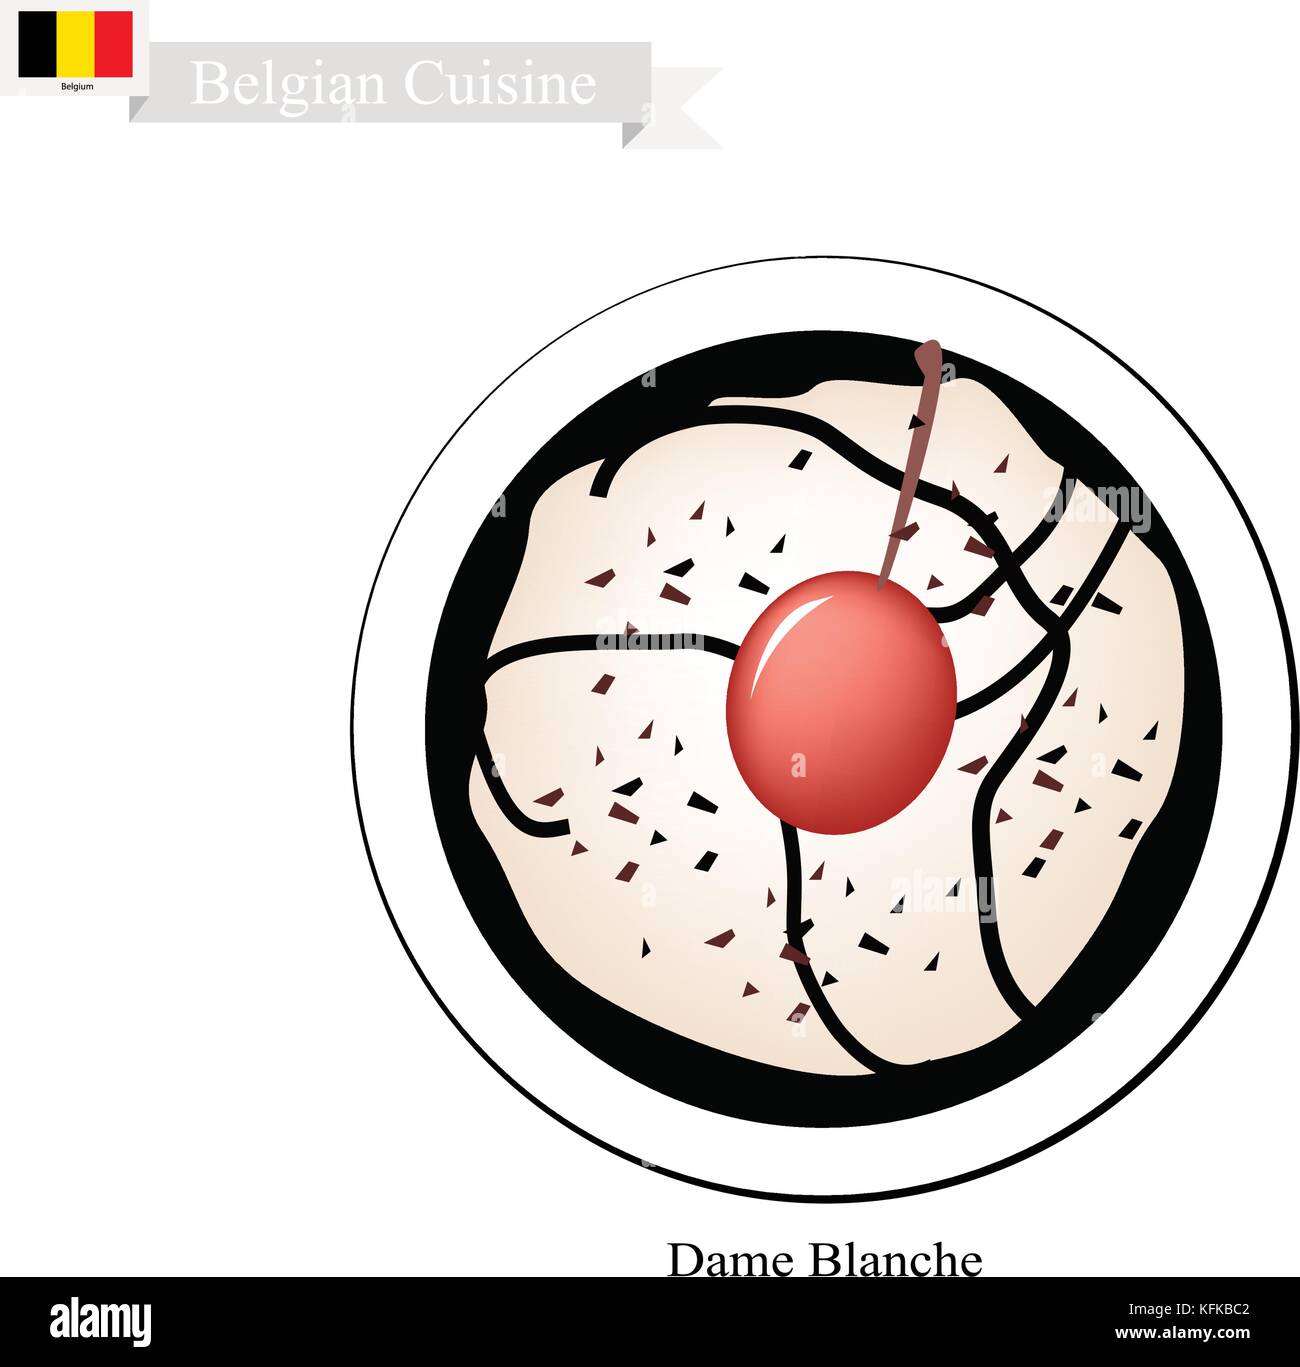 Belgian Cuisine, Dame Blanche or Traditional Vanilla Ice Cream with Berry and Chocolate Syrup. One of Tha Most Popular Dessert in Belgium. Stock Vector